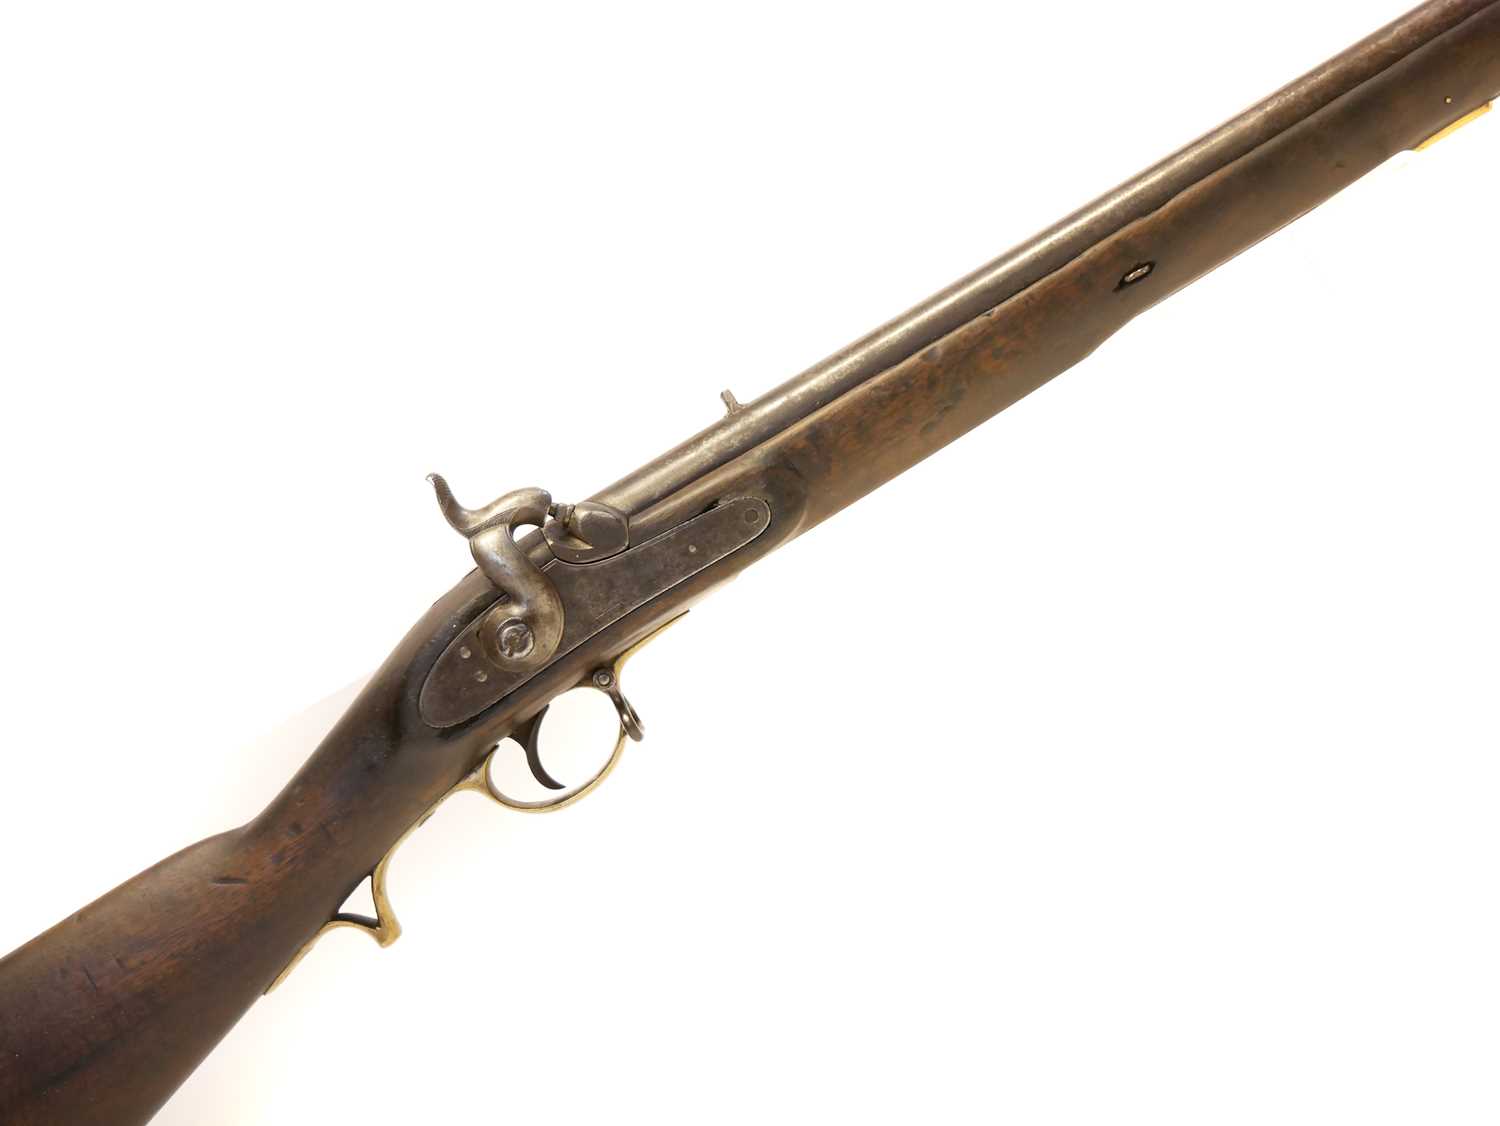 East India Company pattern D type 3 musket,